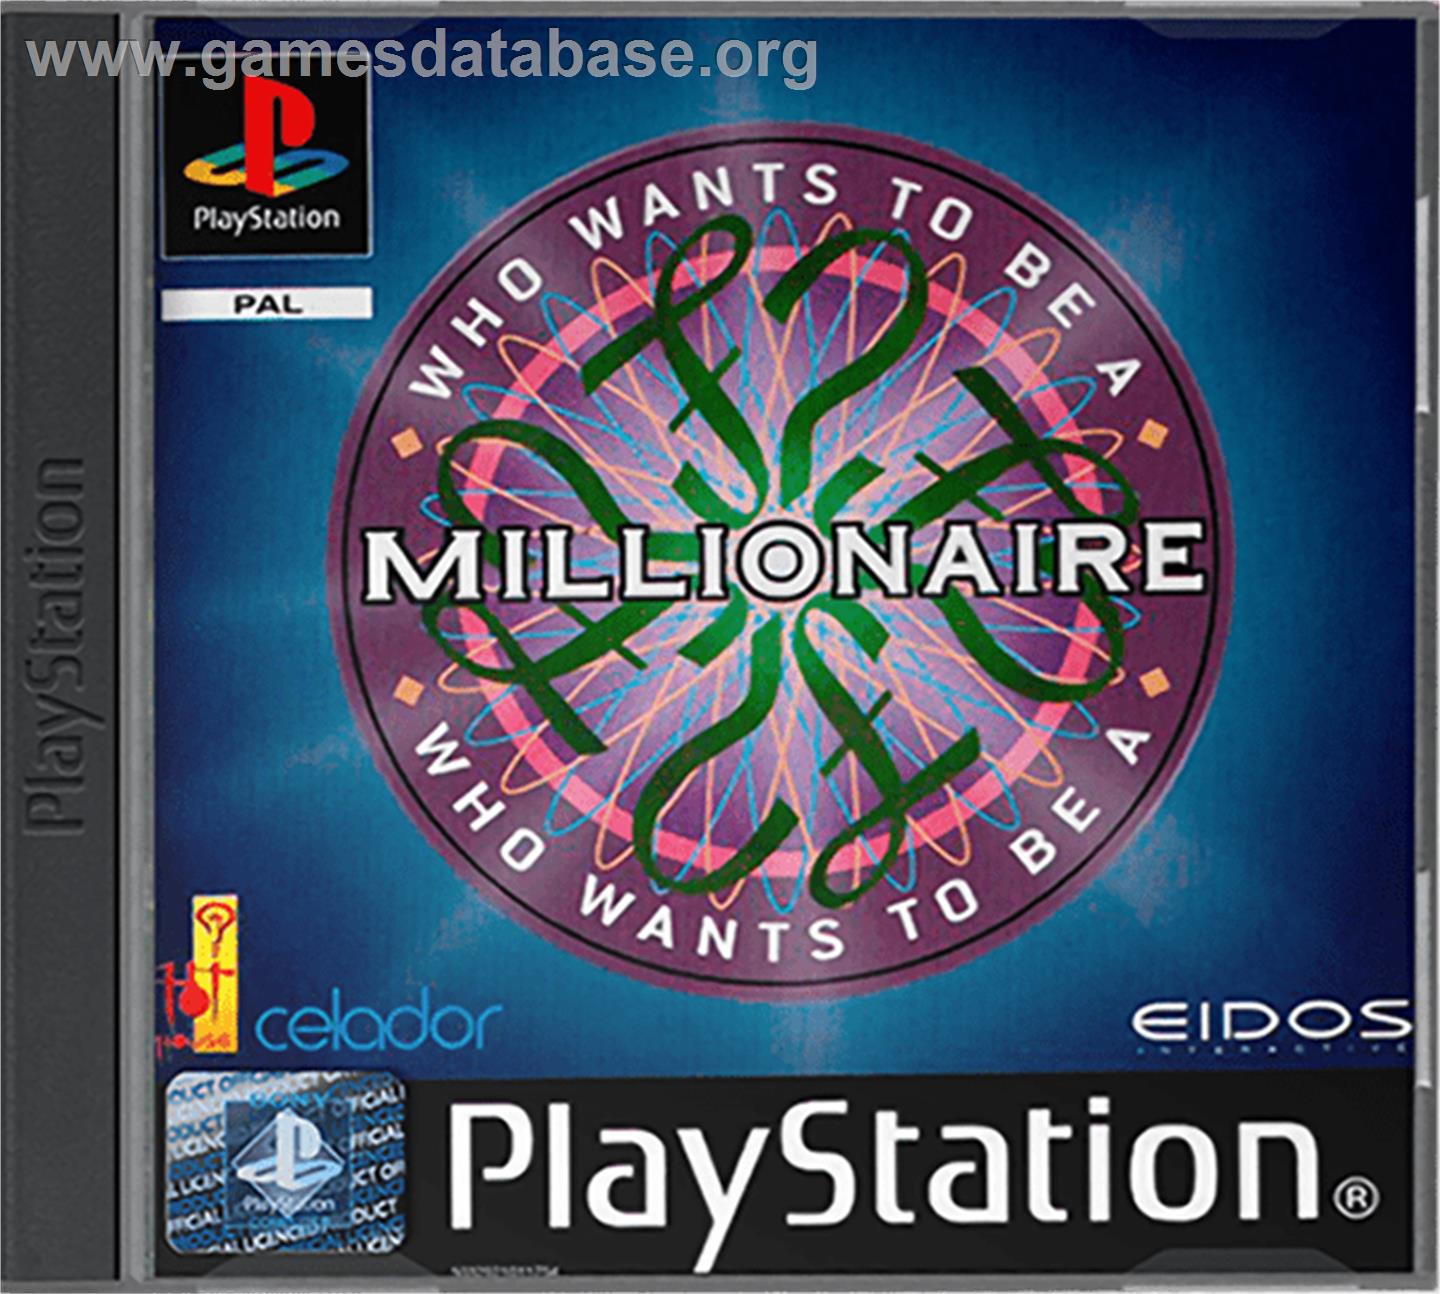 Who Wants to Be a Millionaire (European Edition) - Sony Playstation - Artwork - Box